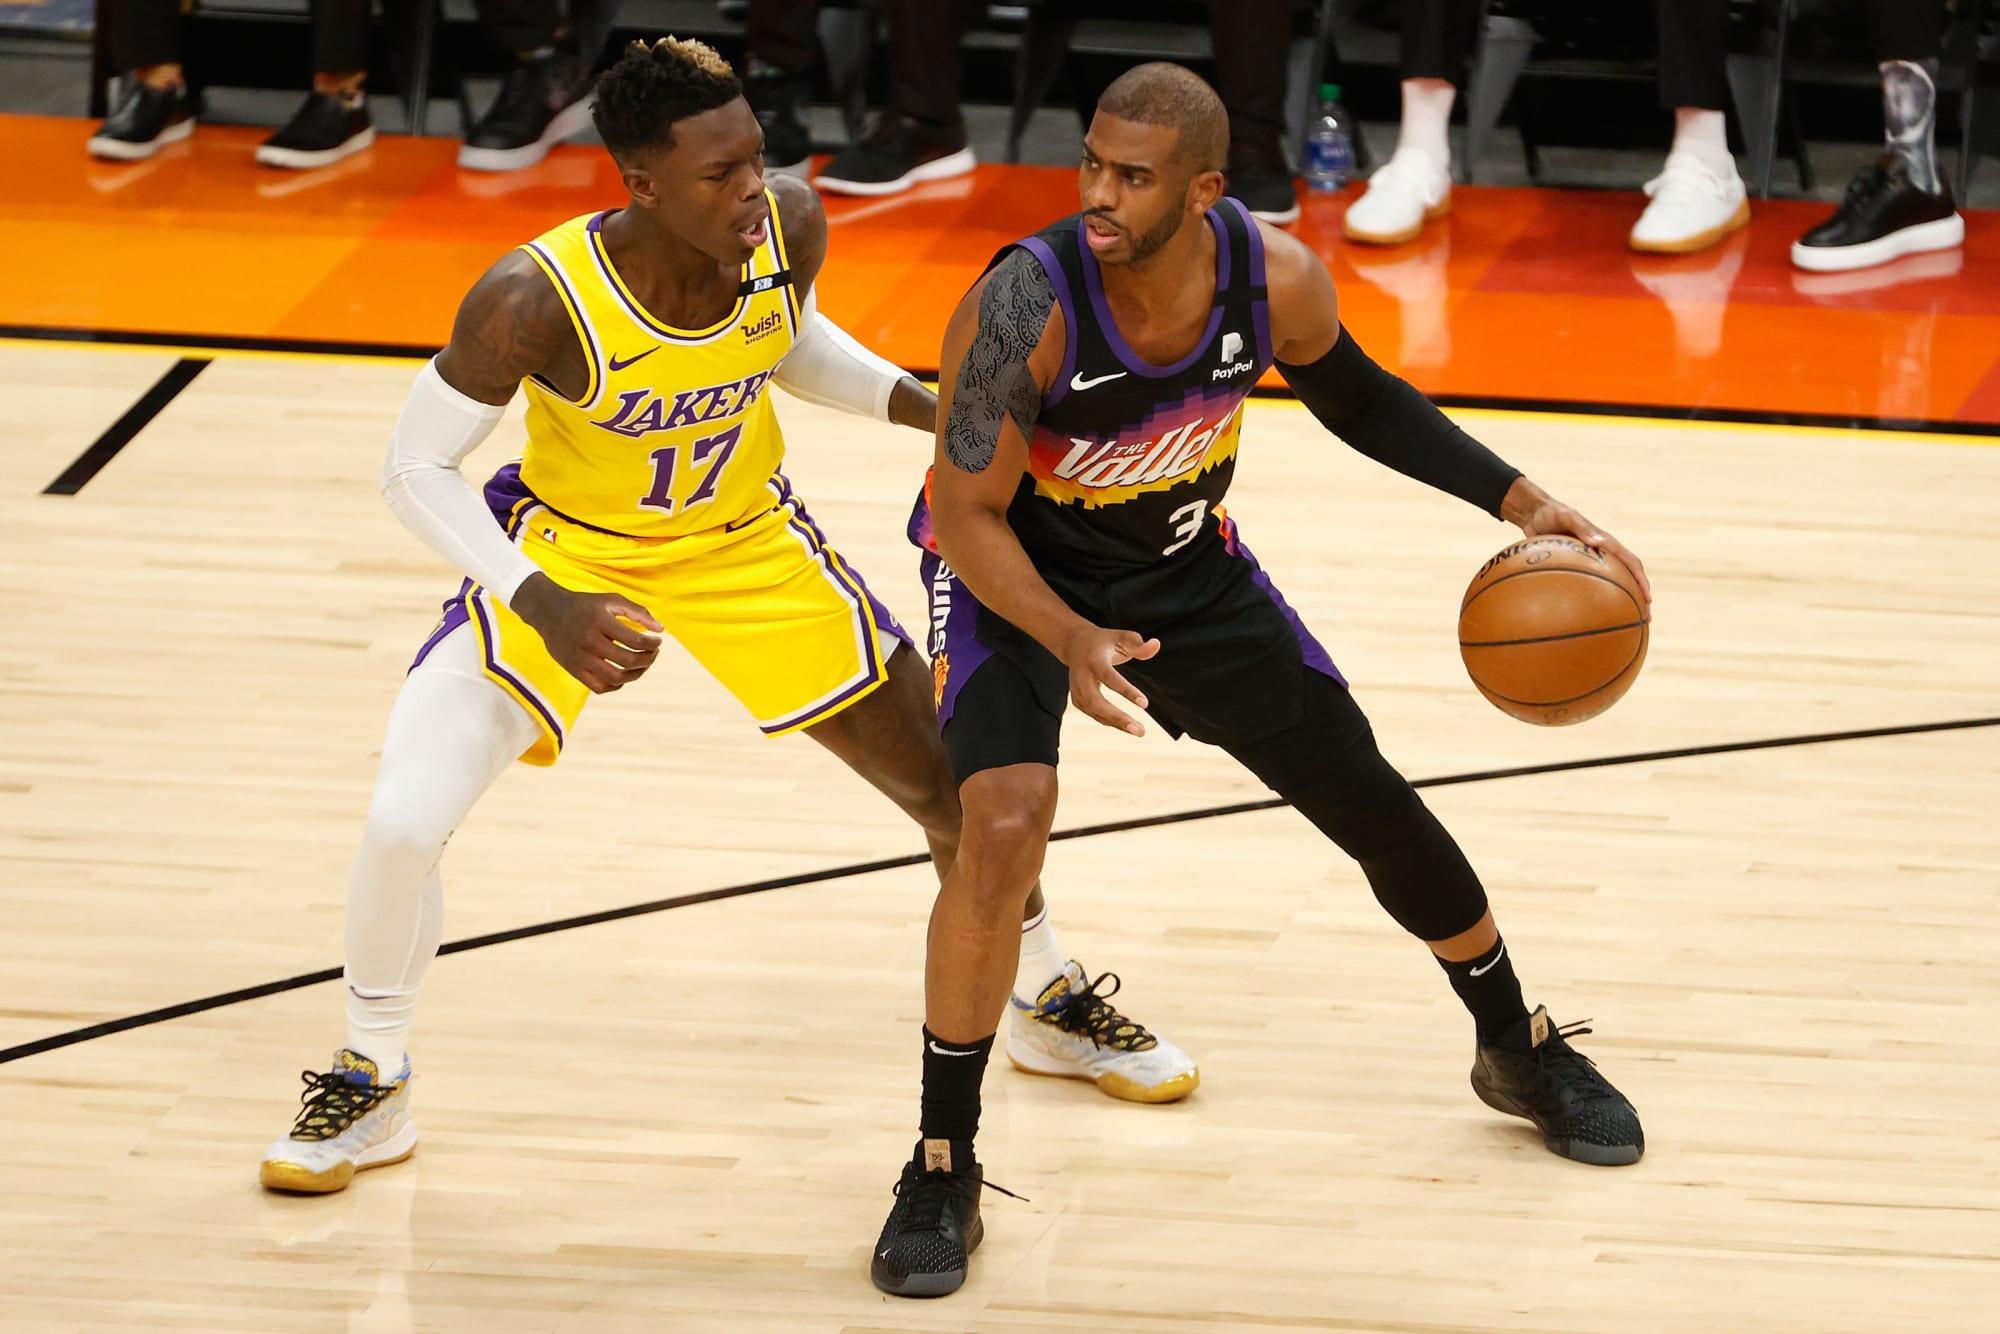 Lakers vs Suns NBA live stream reddit for NBA Playoffs Game 4